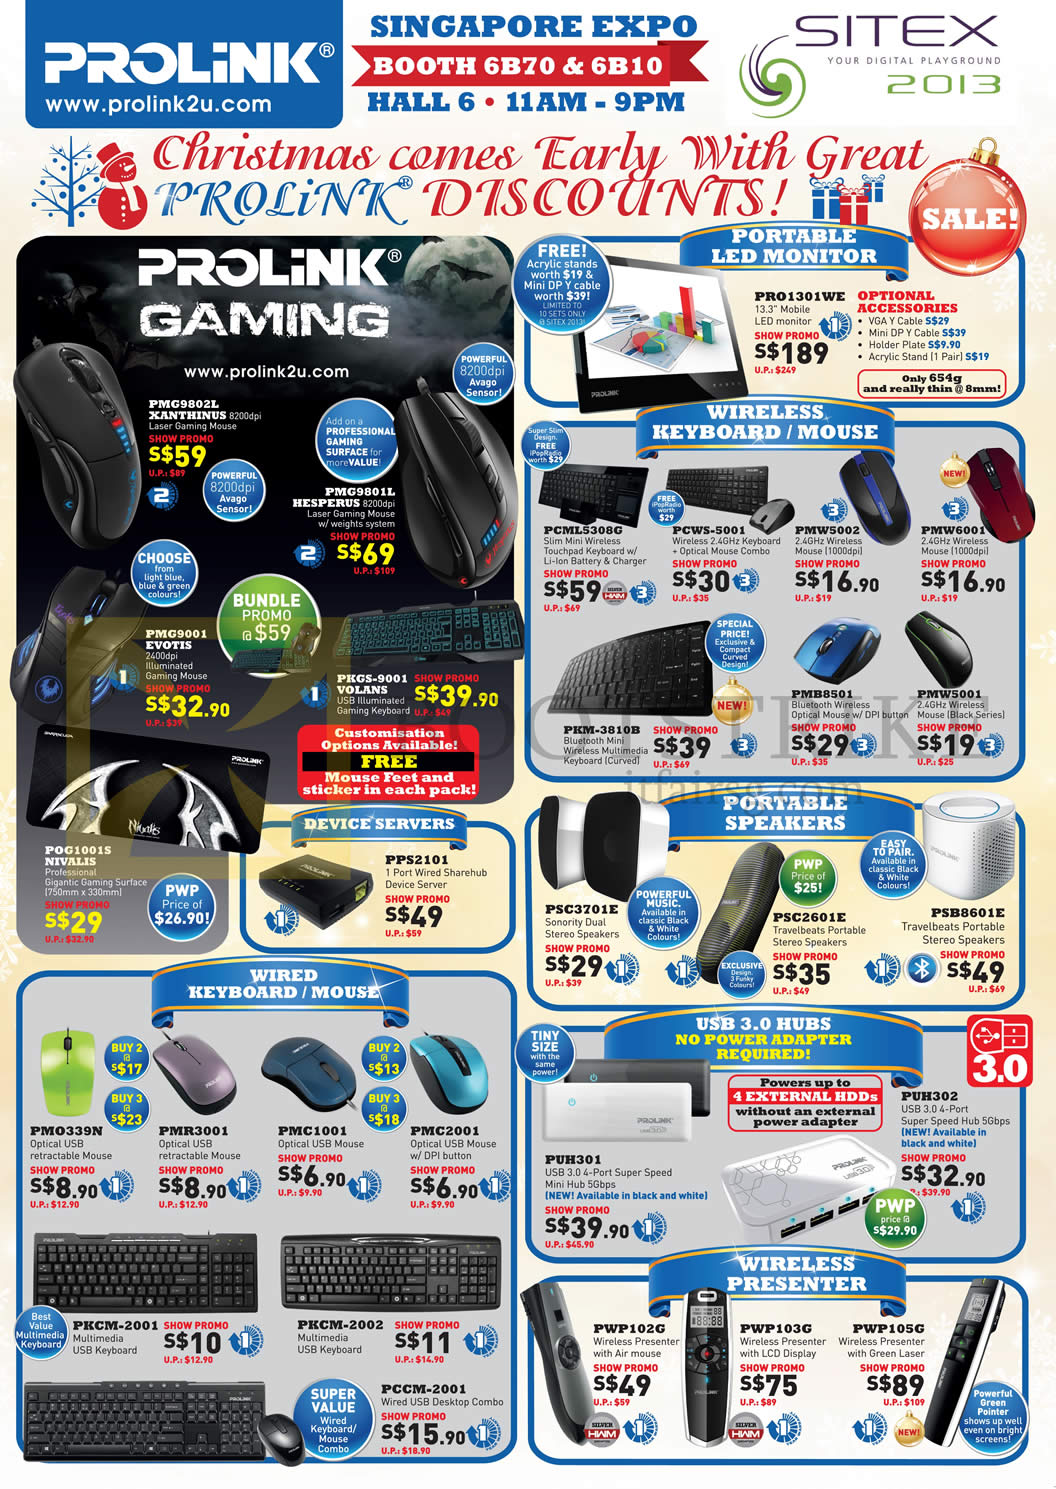 SITEX 2013 price list image brochure of Prolink Accessories LED Monitor, Wireless Keyboard, Mouse, Portable Speakers, USB 3.0 Hubs, Presenter, Keyboard, Mouse